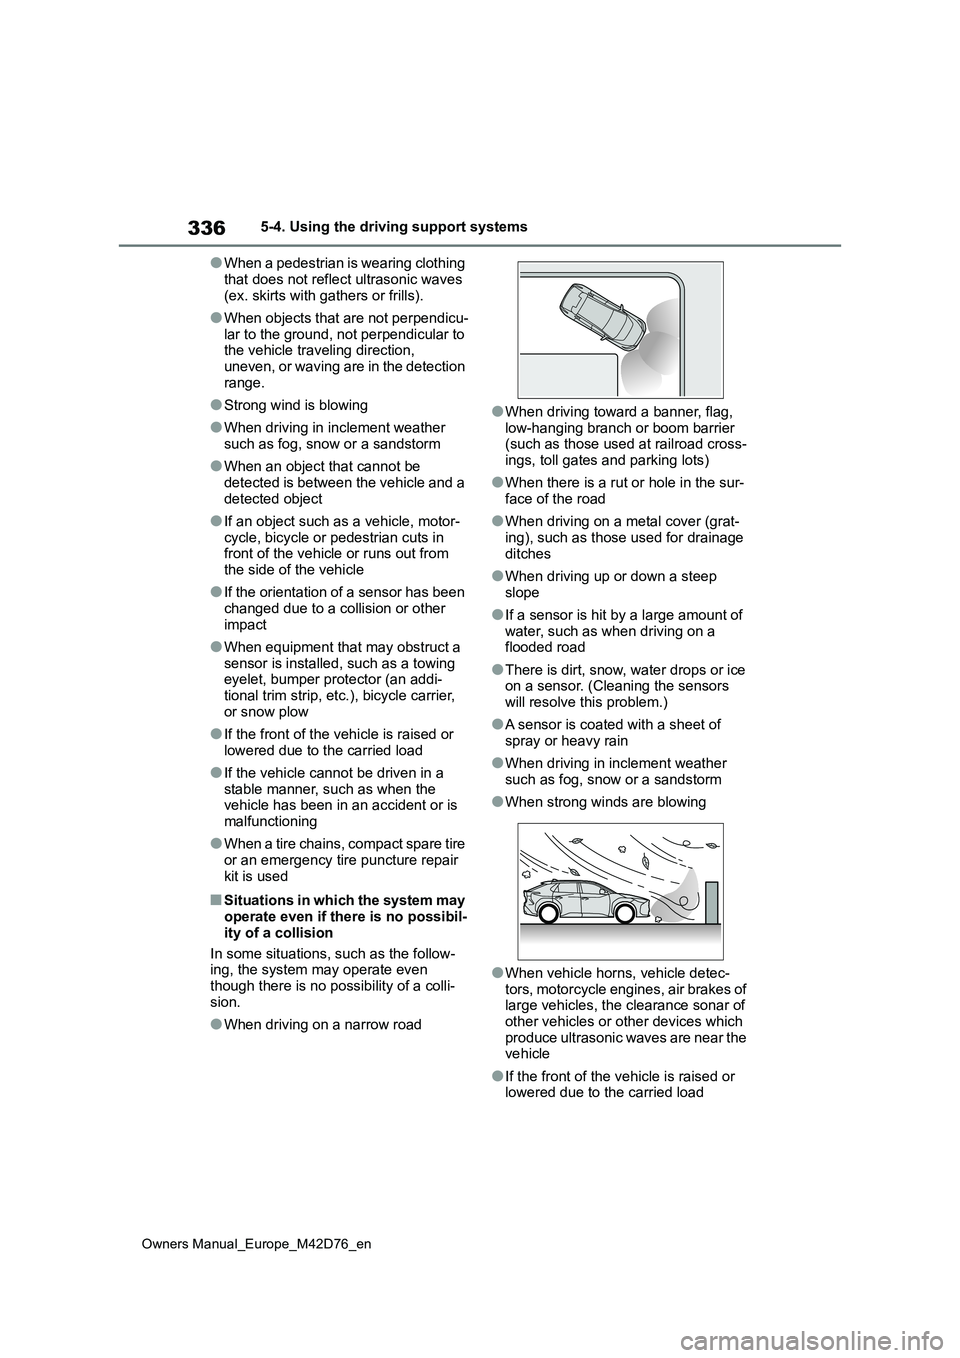 TOYOTA BZ4X 2022  Owners Manual (in English) 336
Owners Manual_Europe_M42D76_en
5-4. Using the driving support systems
●When a pedestrian is wearing clothing  
that does not reflect ultrasonic waves  (ex. skirts with gathers or frills).
●Whe